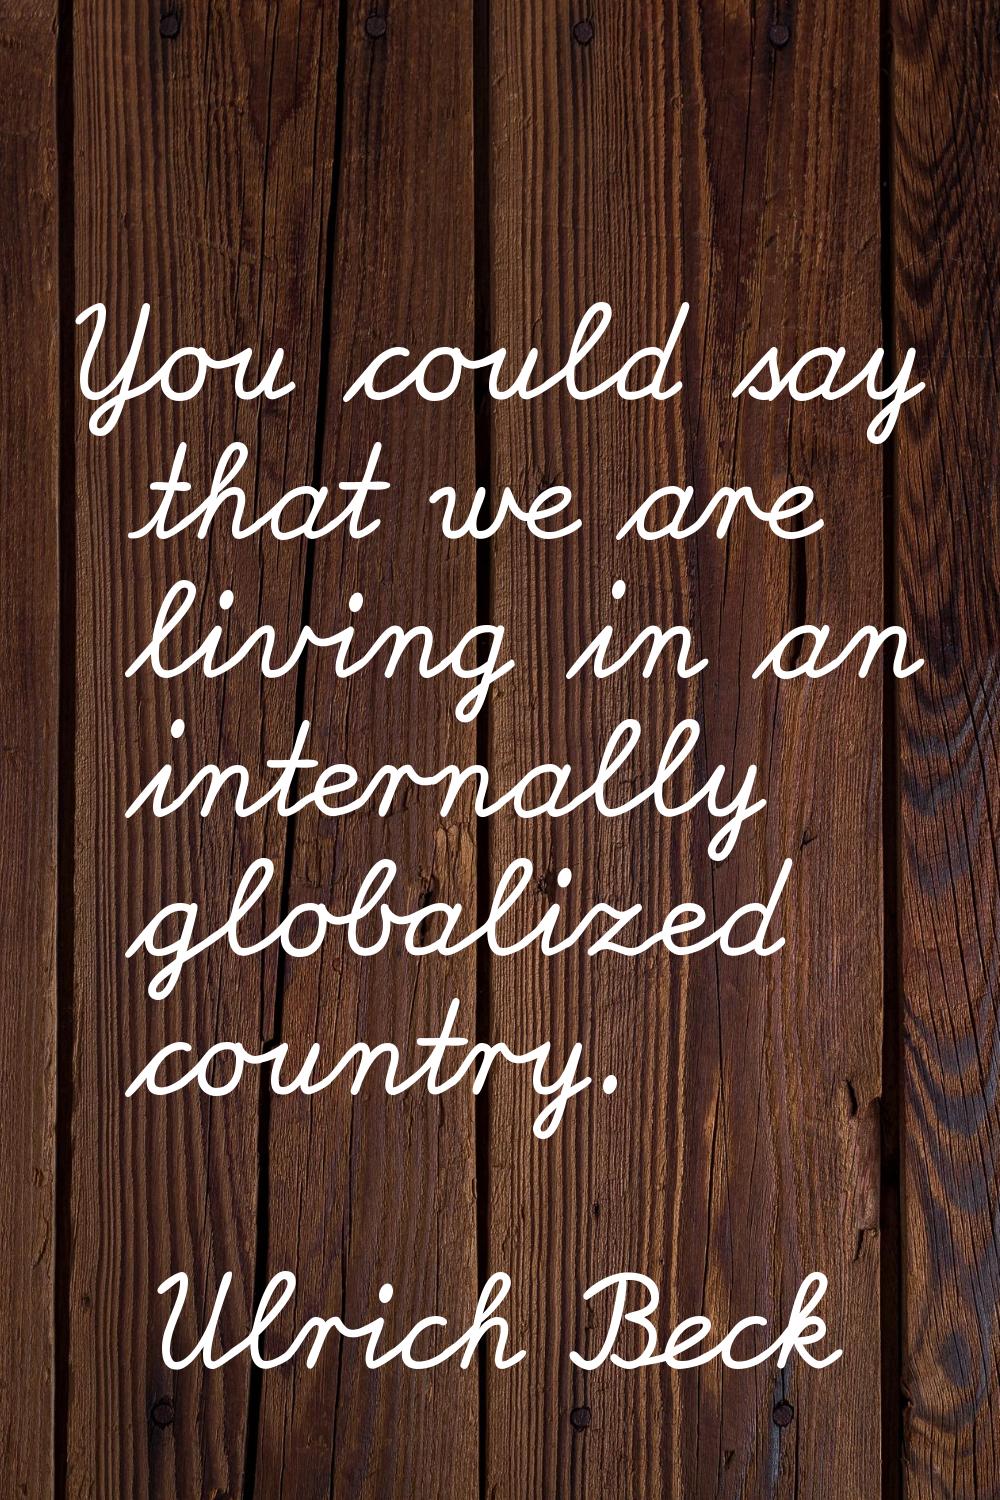 You could say that we are living in an internally globalized country.